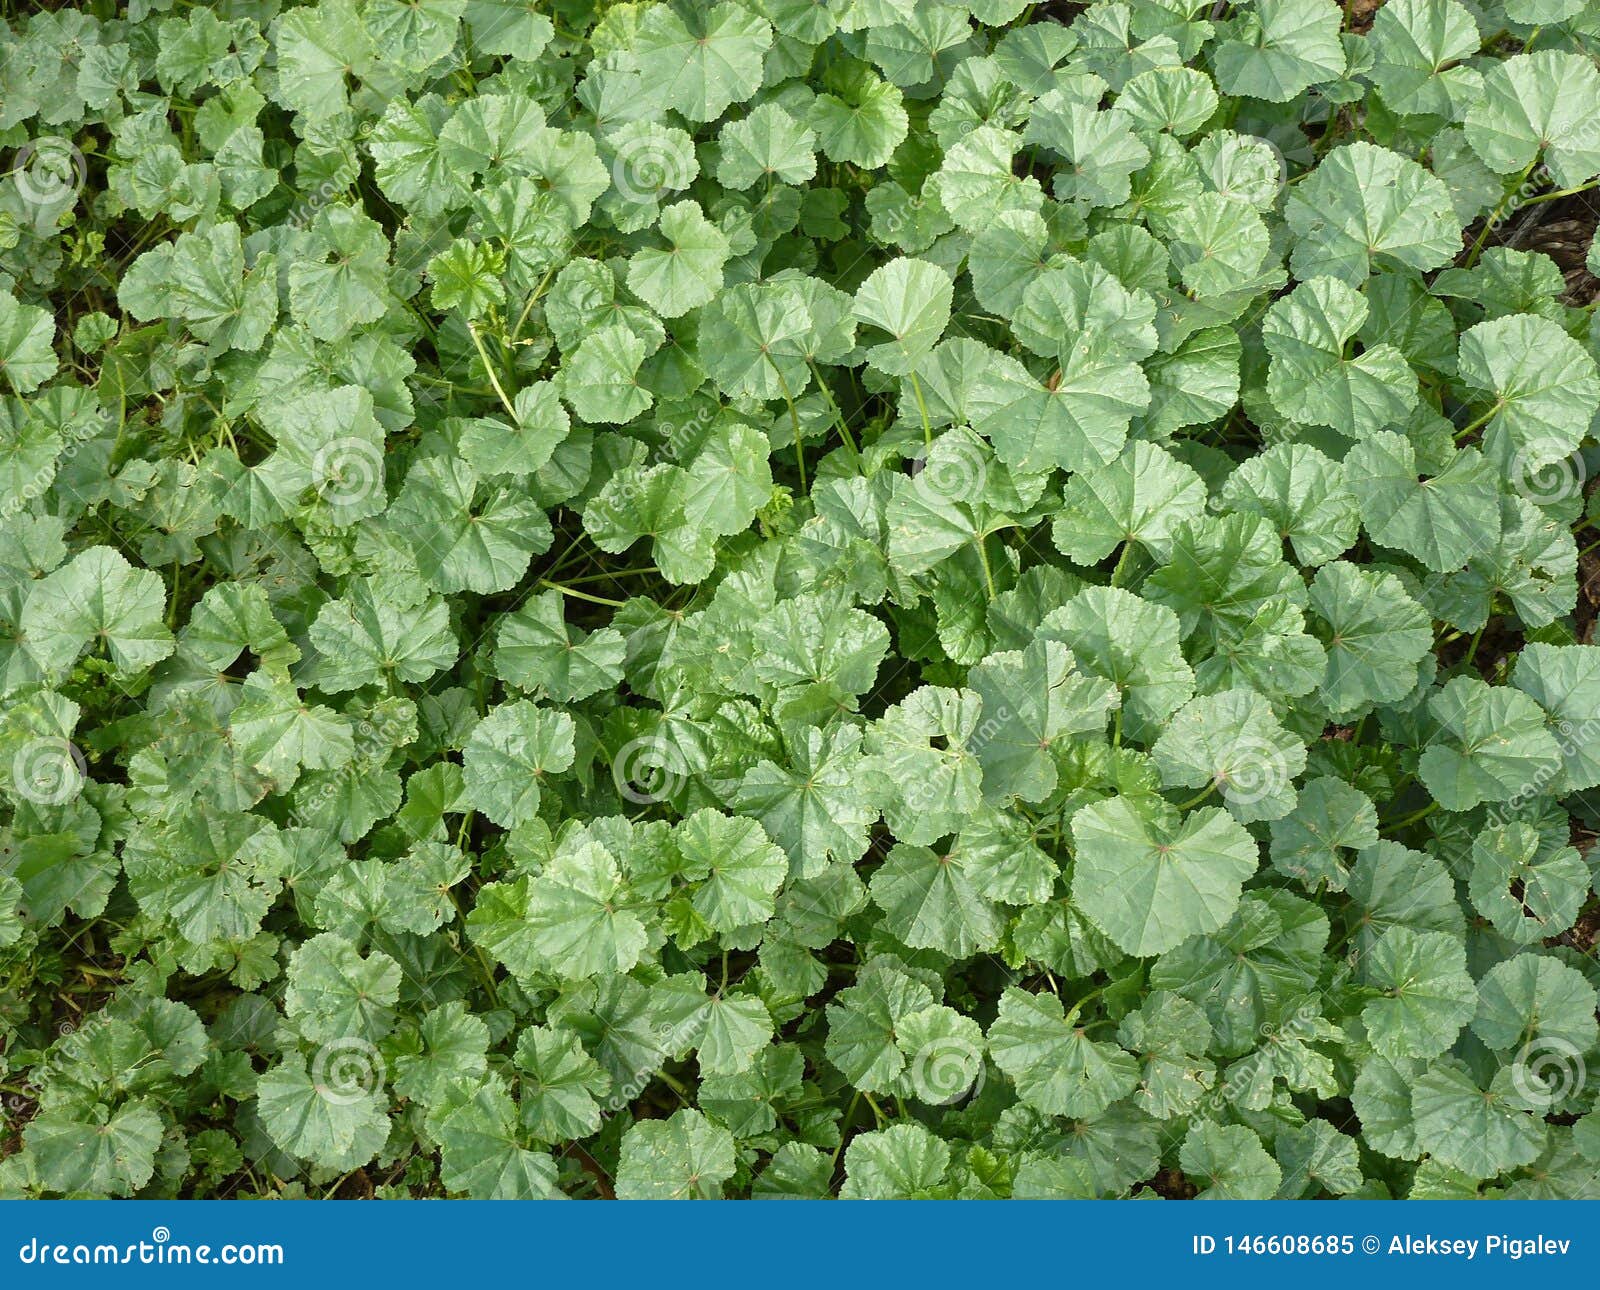 Single-color Green Carpet of Small Leaves Stock Image - Image of